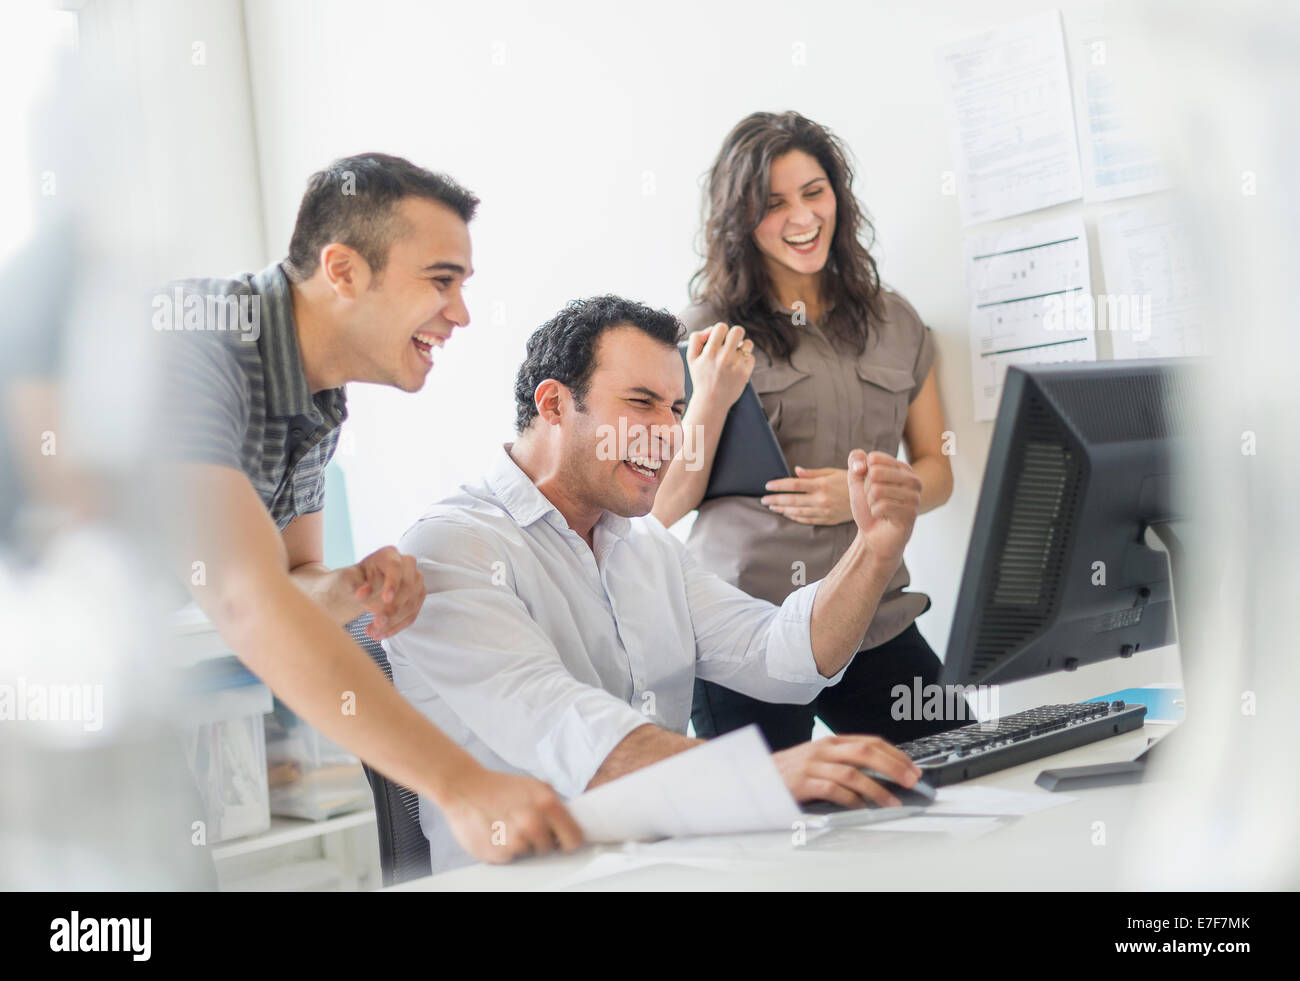 Hispanic business people cheering together in office Stock Photo